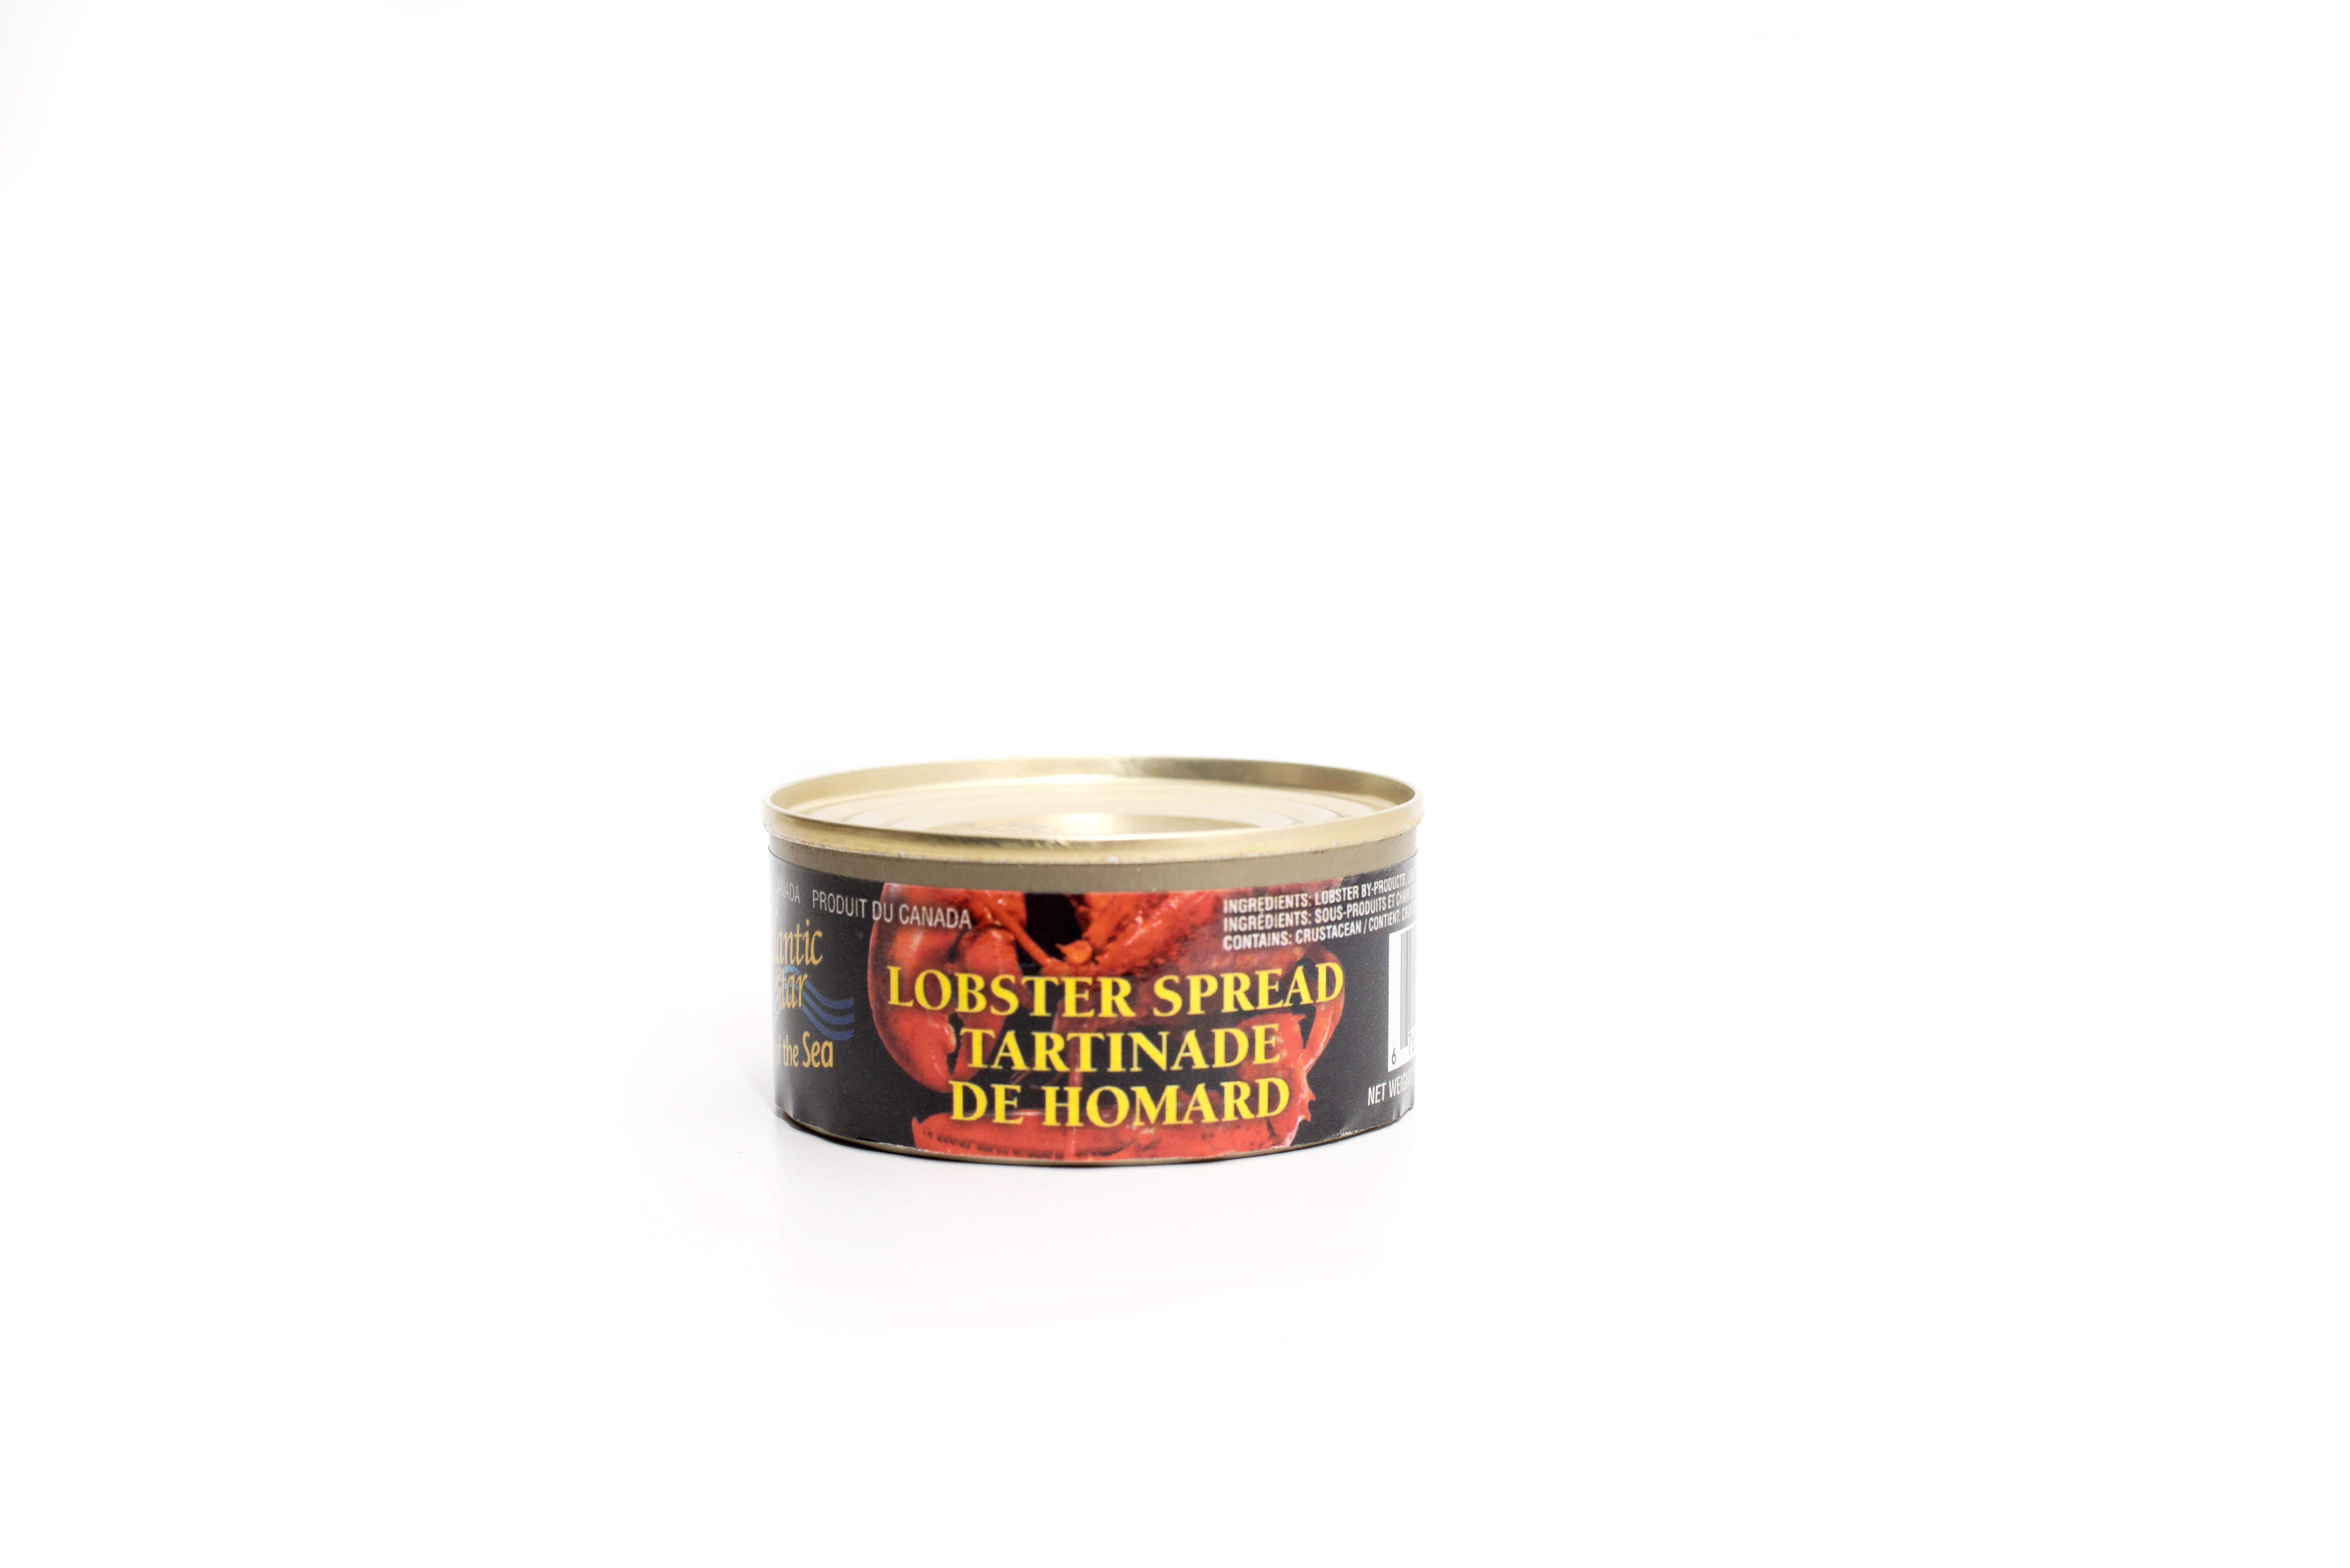 A unique blend of Lobsterspread. Ingredients- lobster by-products, lobster meat, wheat farina, salt